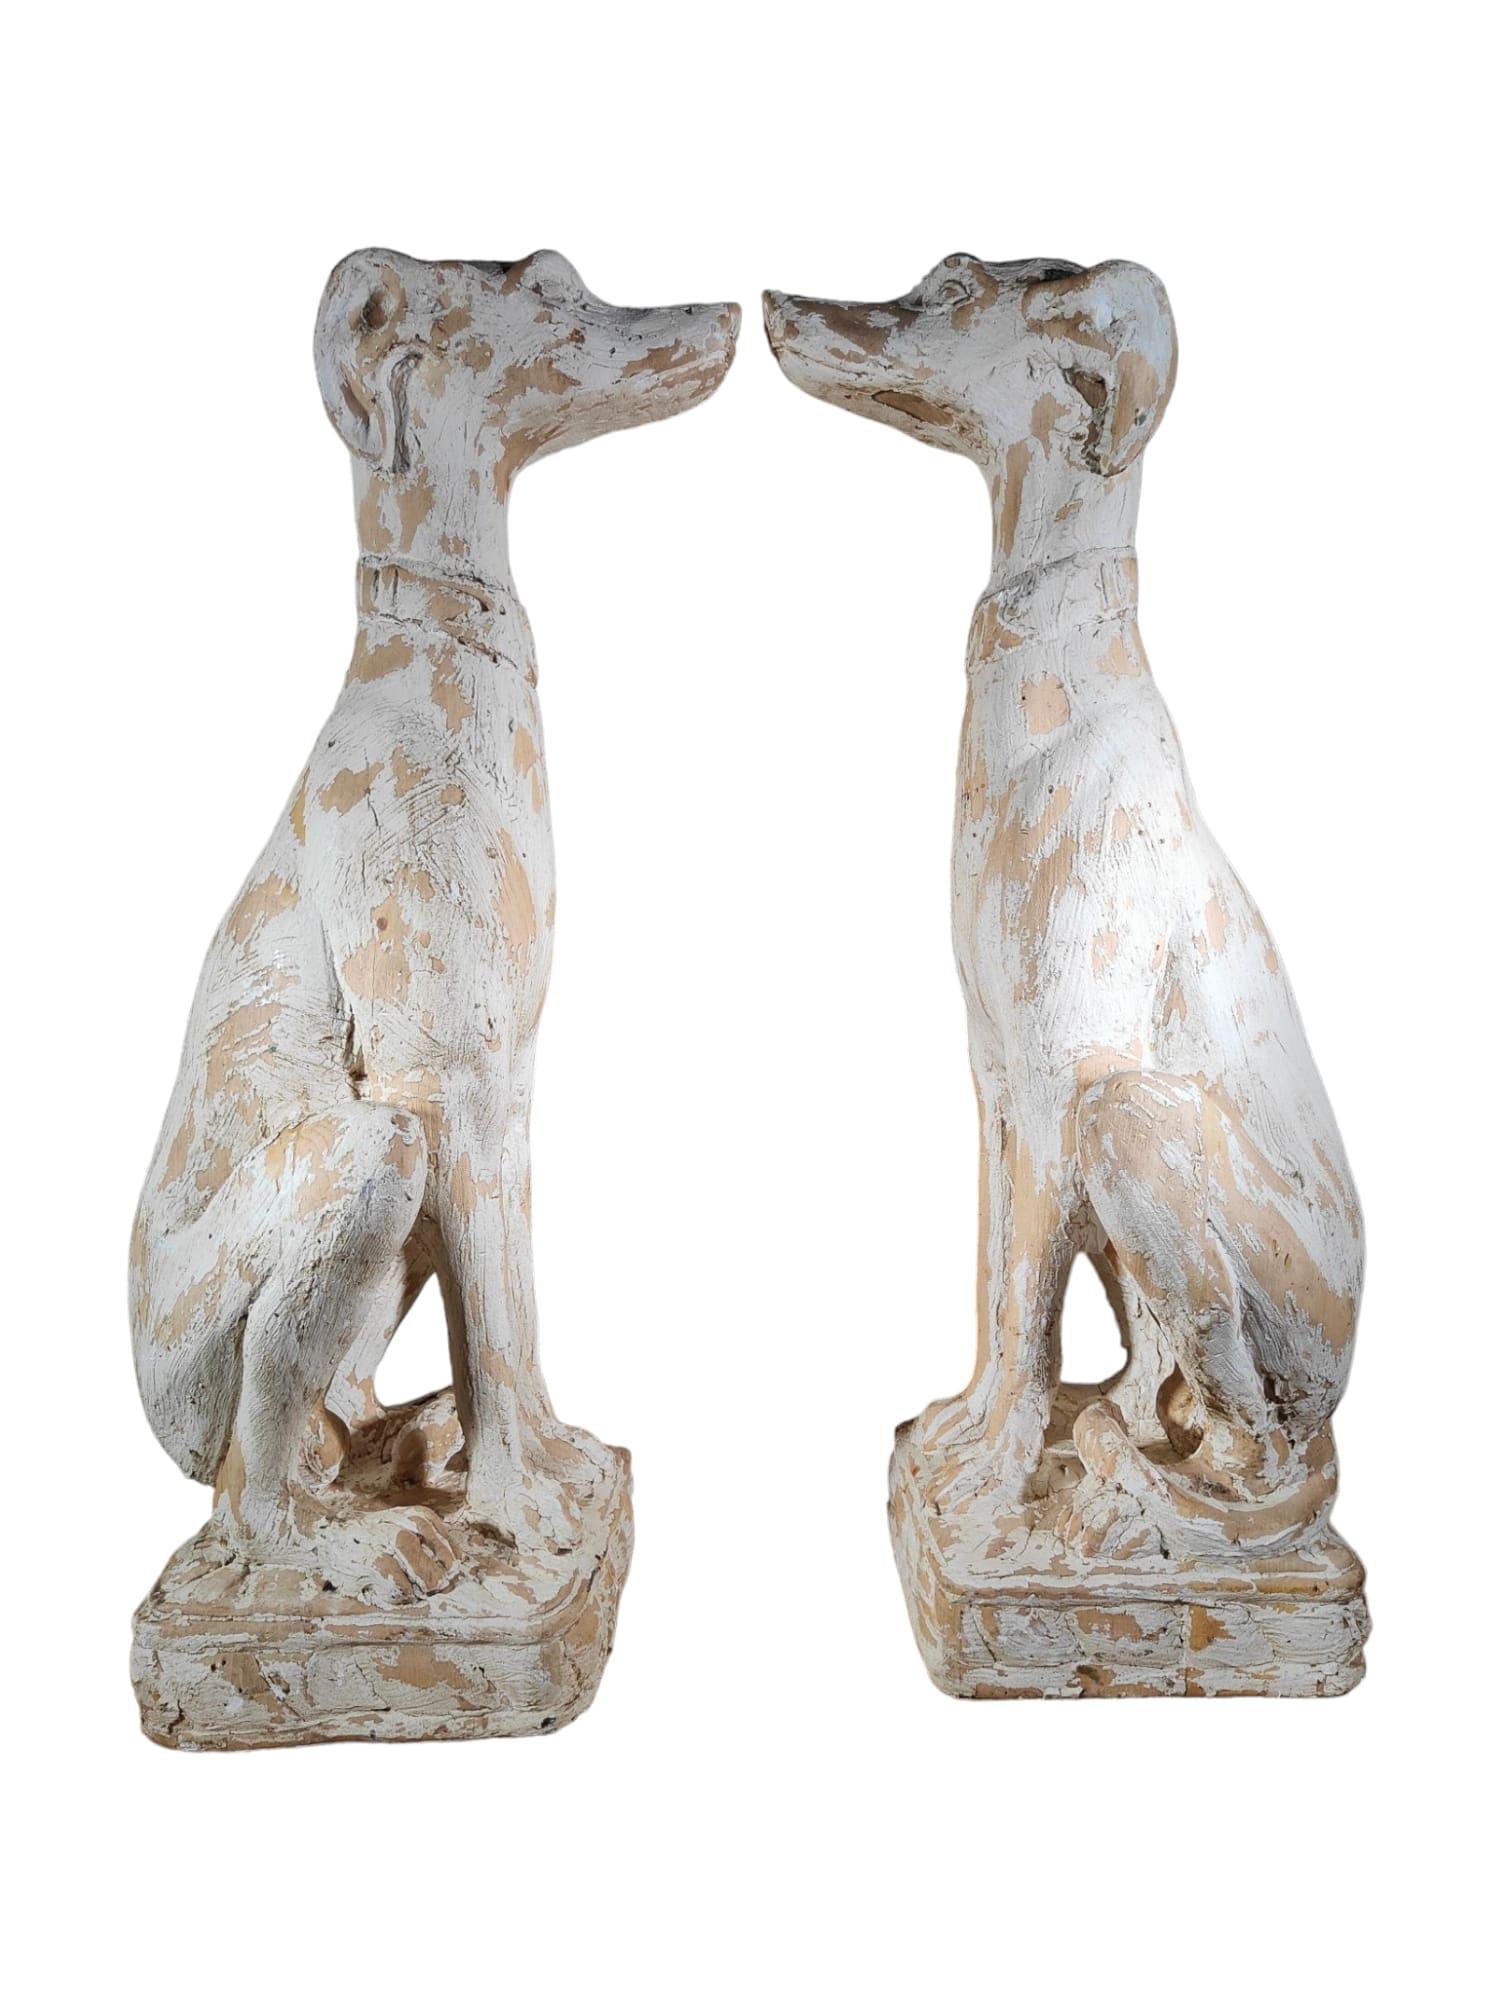 Charming Pair of Italian Greyhounds: Decorative Solid Wood Carved Statues For Sale 4